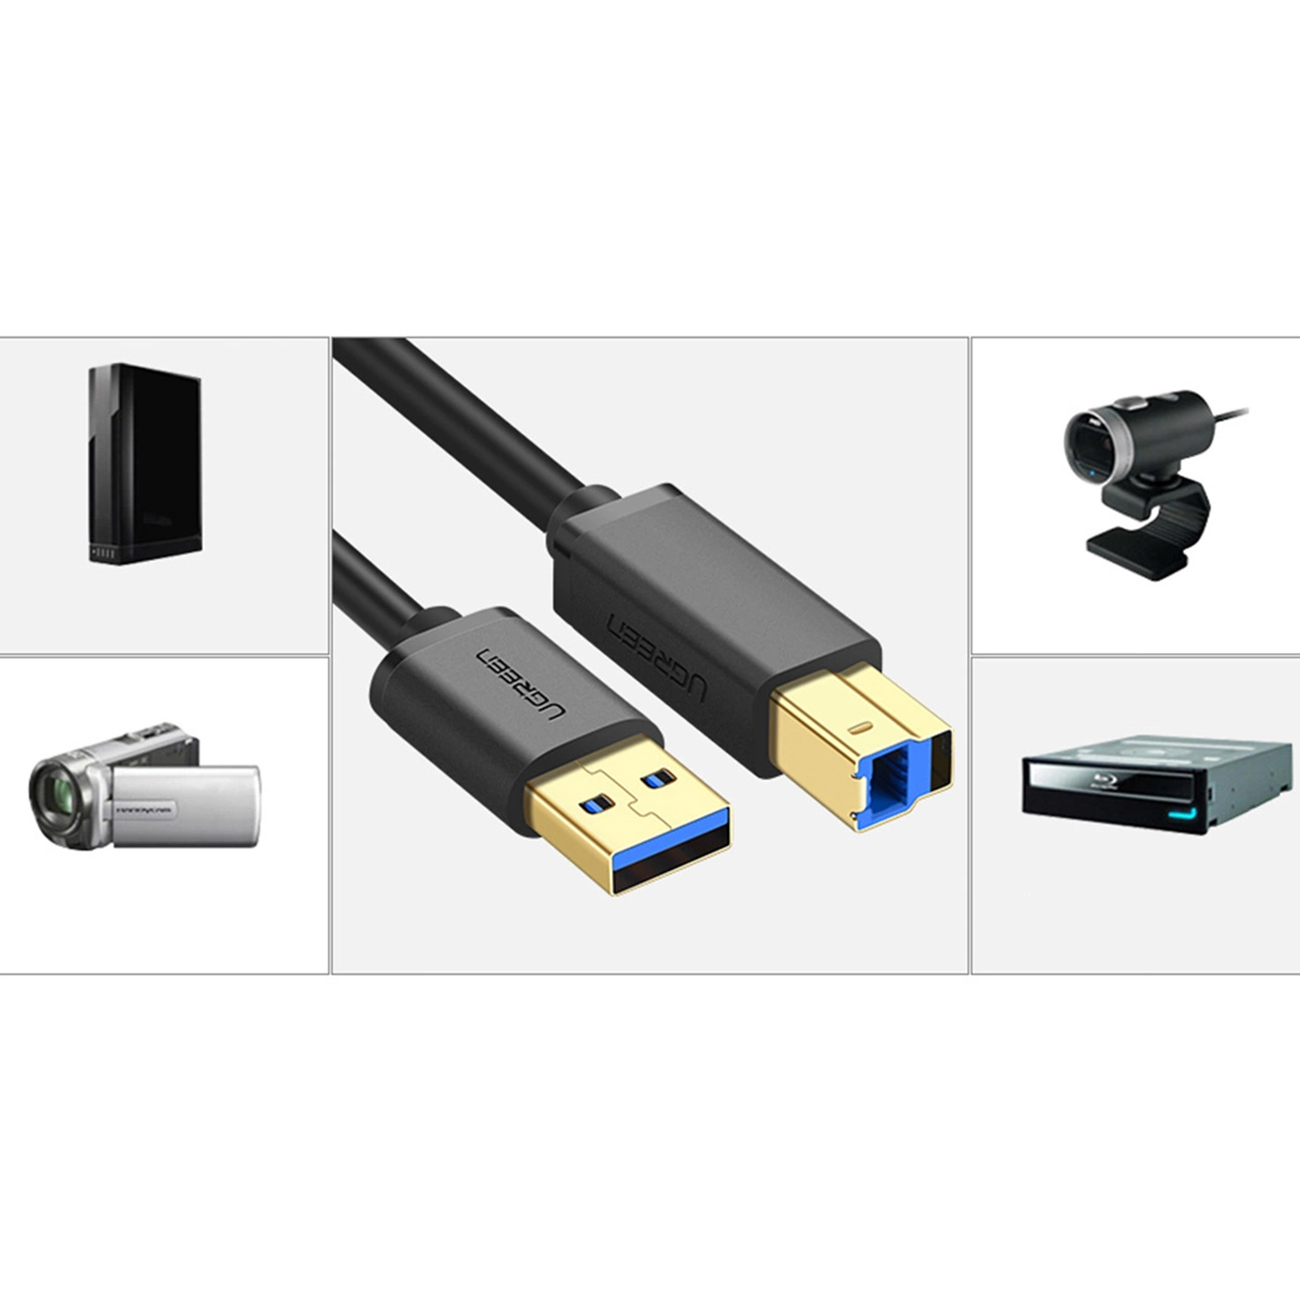 Devices compatible with the Ugreen US210 cable